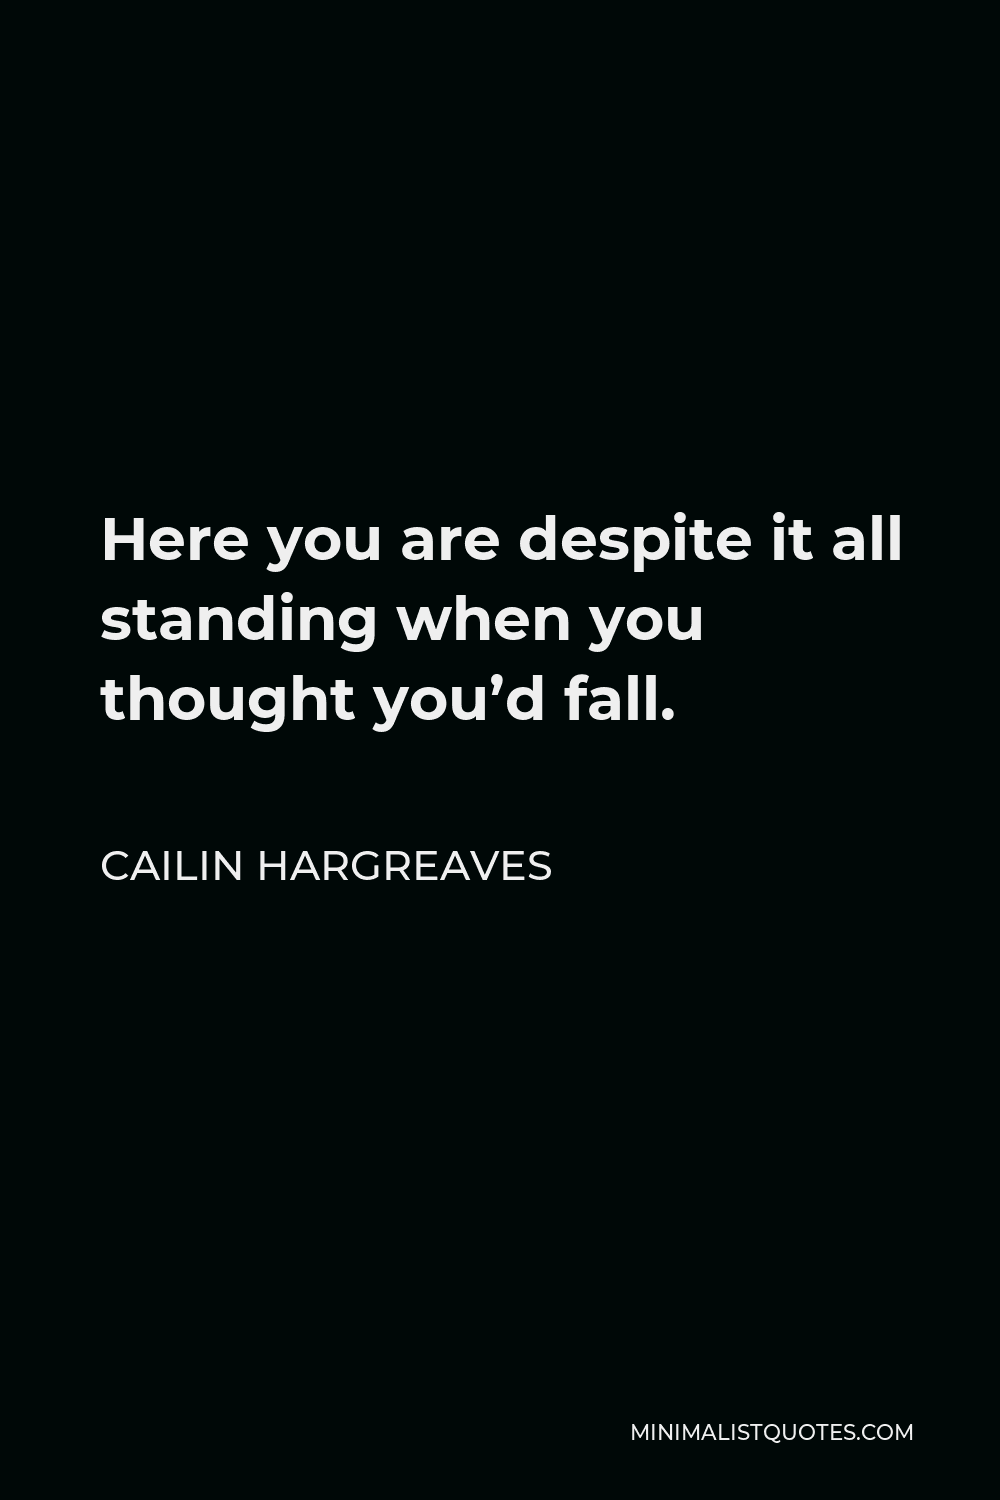 Cailin Hargreaves Quote - Here you are despite it all standing when you thought you’d fall.